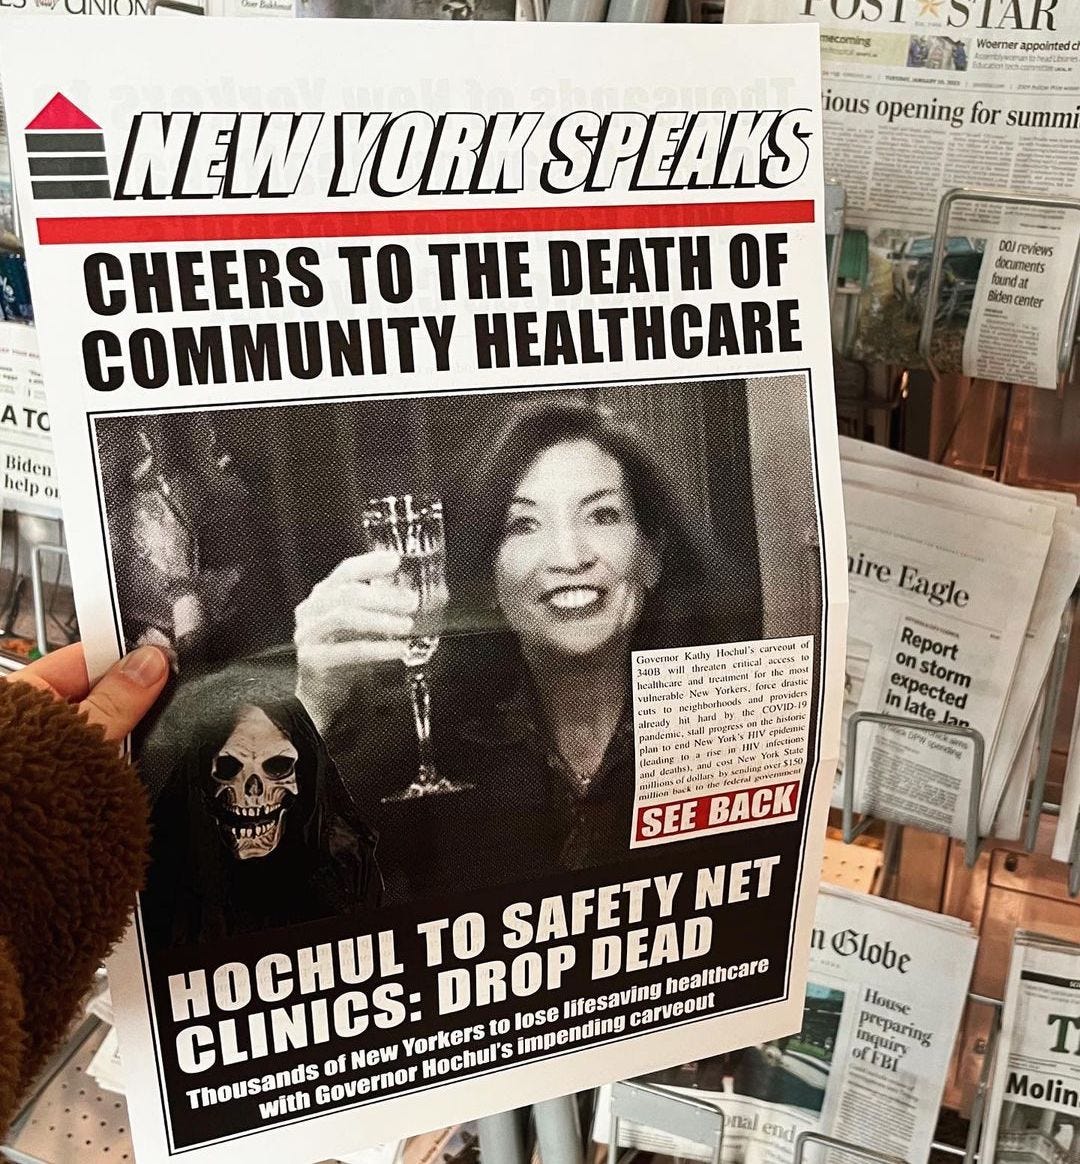 A newspaper called NEW YORK SPEAKS has an image of Kathy Hochul raising a glass of champagne. “Cheers to the death of community healthcare / Hochul to safety net clinics: Drop dead.”